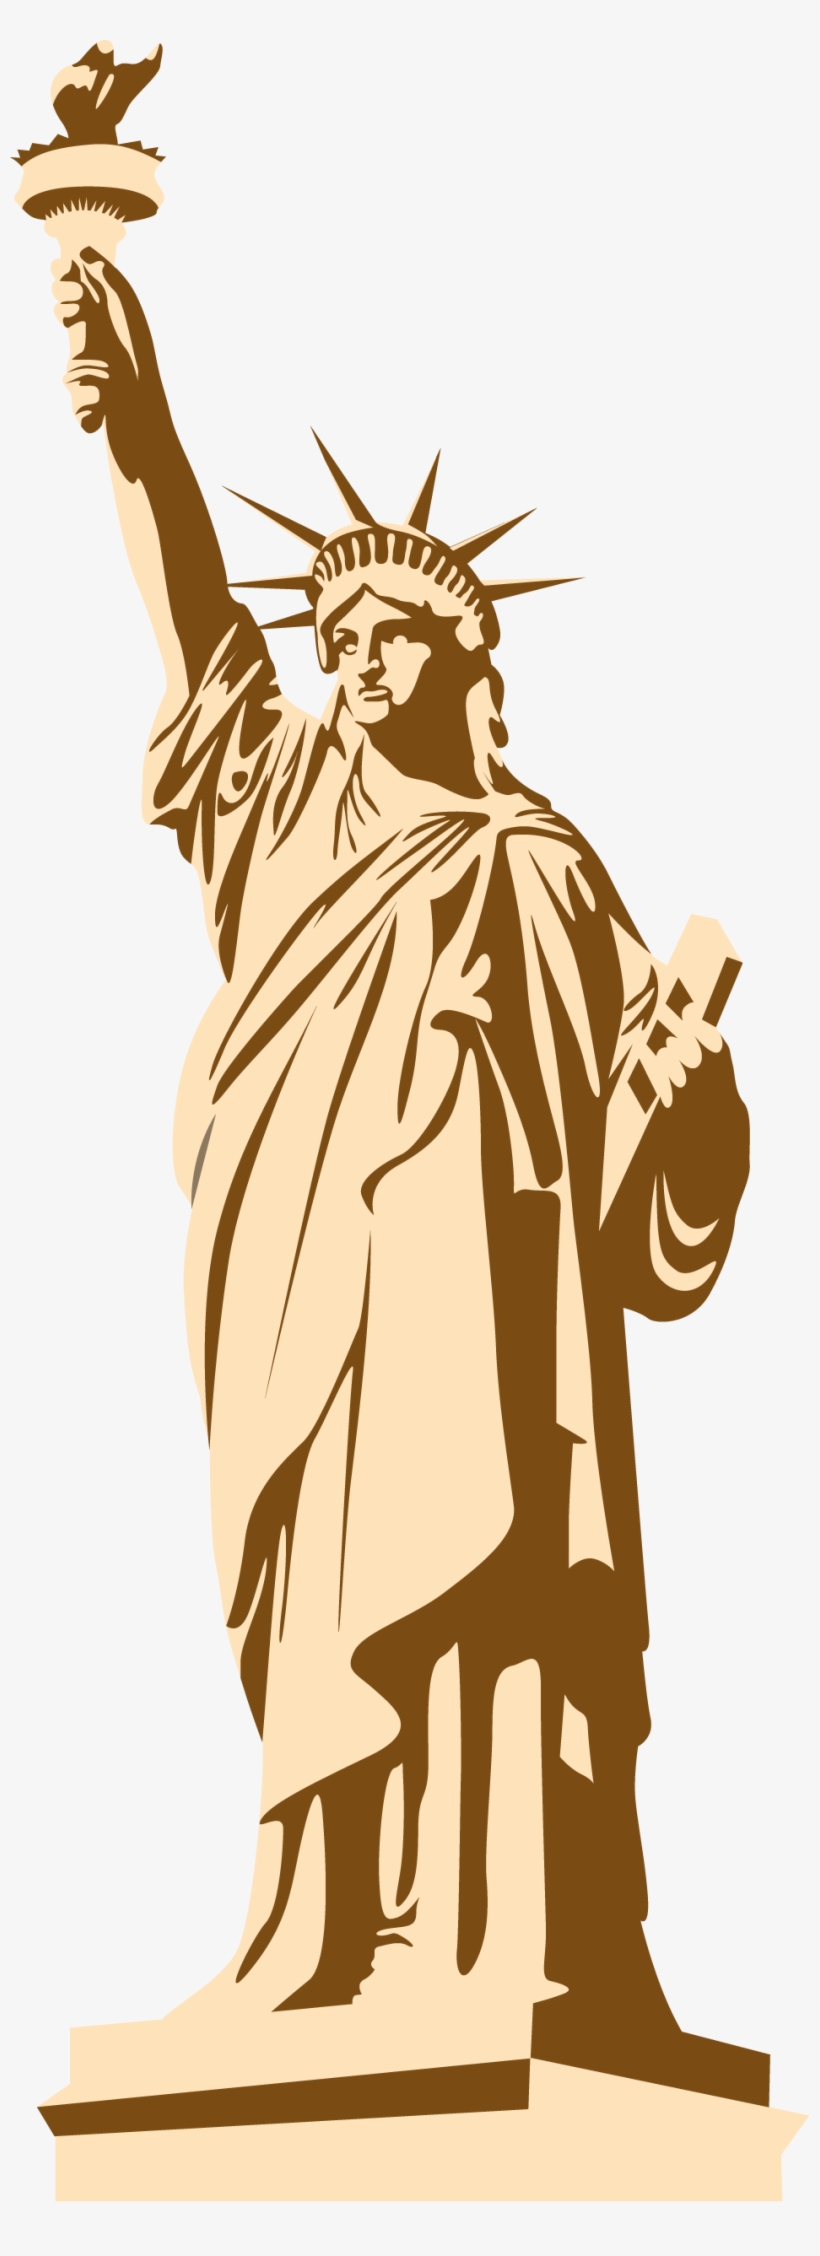 Statue Of Liberty Crown Png Download - E-vitta Stand 2p 10.1 One Size, transparent png #276597